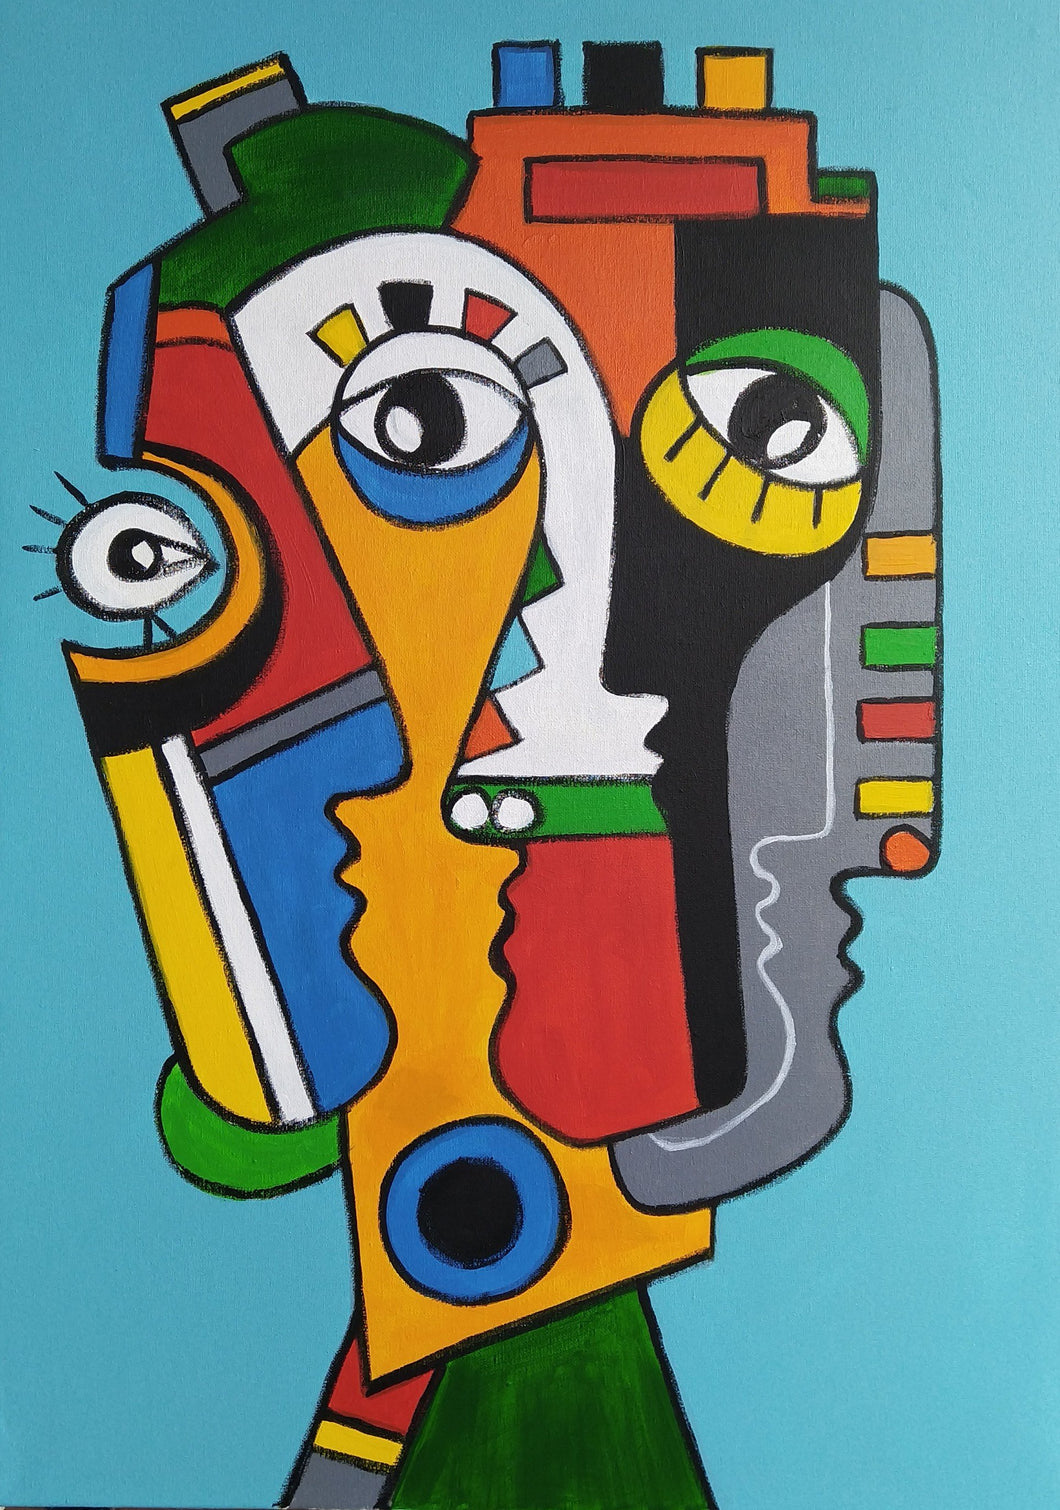 FRIENDS 4 / Original canvas painting EXCLUSIVE TO KIKI STERLING GALLERY - FACES COLLECTION - By Arman Alaverdyan